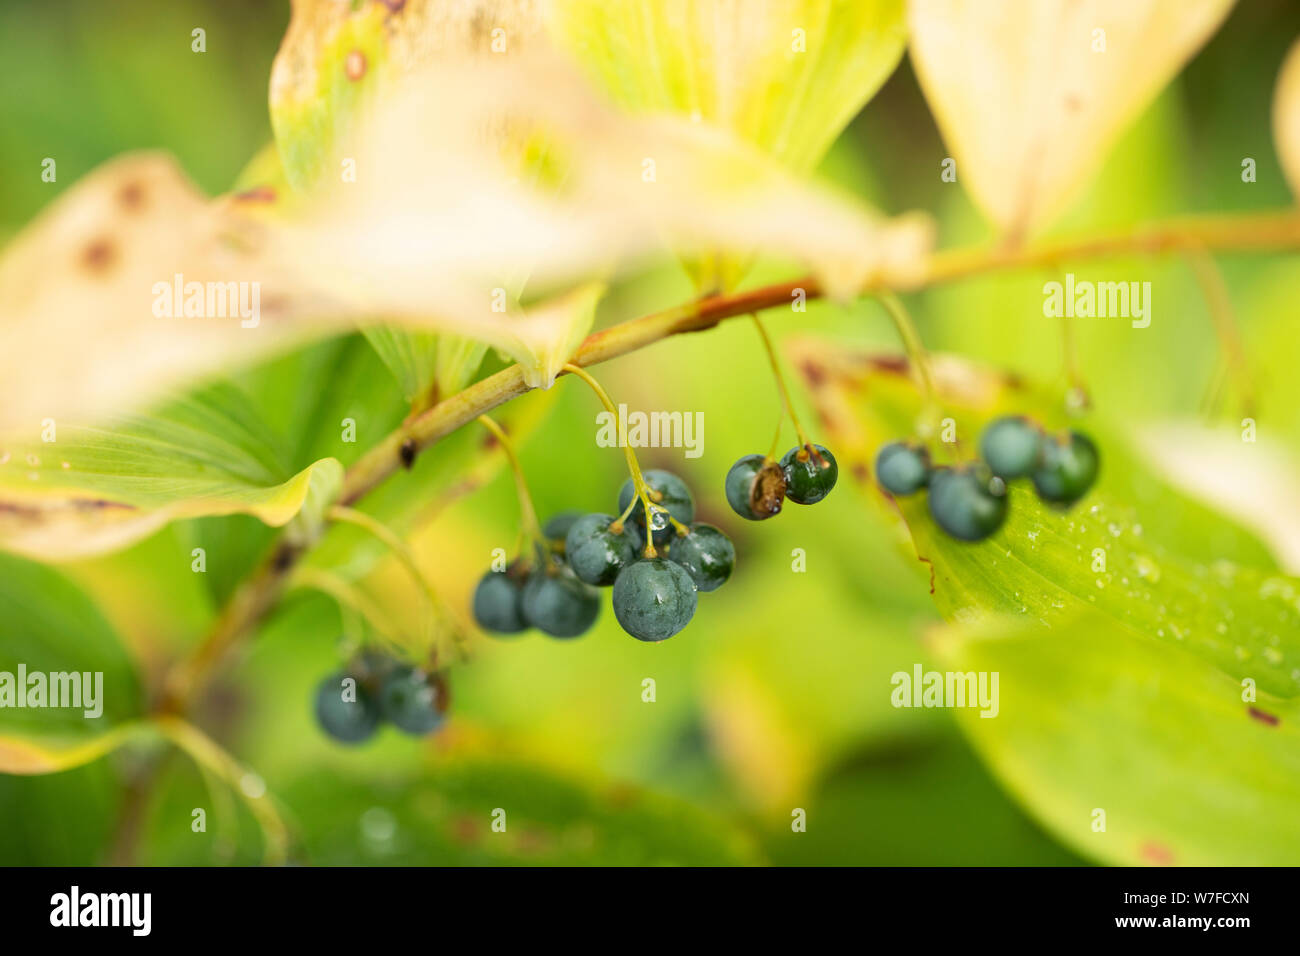 Blue berries on a Polygonatum odoratum plant, known as Solomon's seal,  in family Asparagaceae. This flowering plant is native to Europe and Asia. Stock Photo